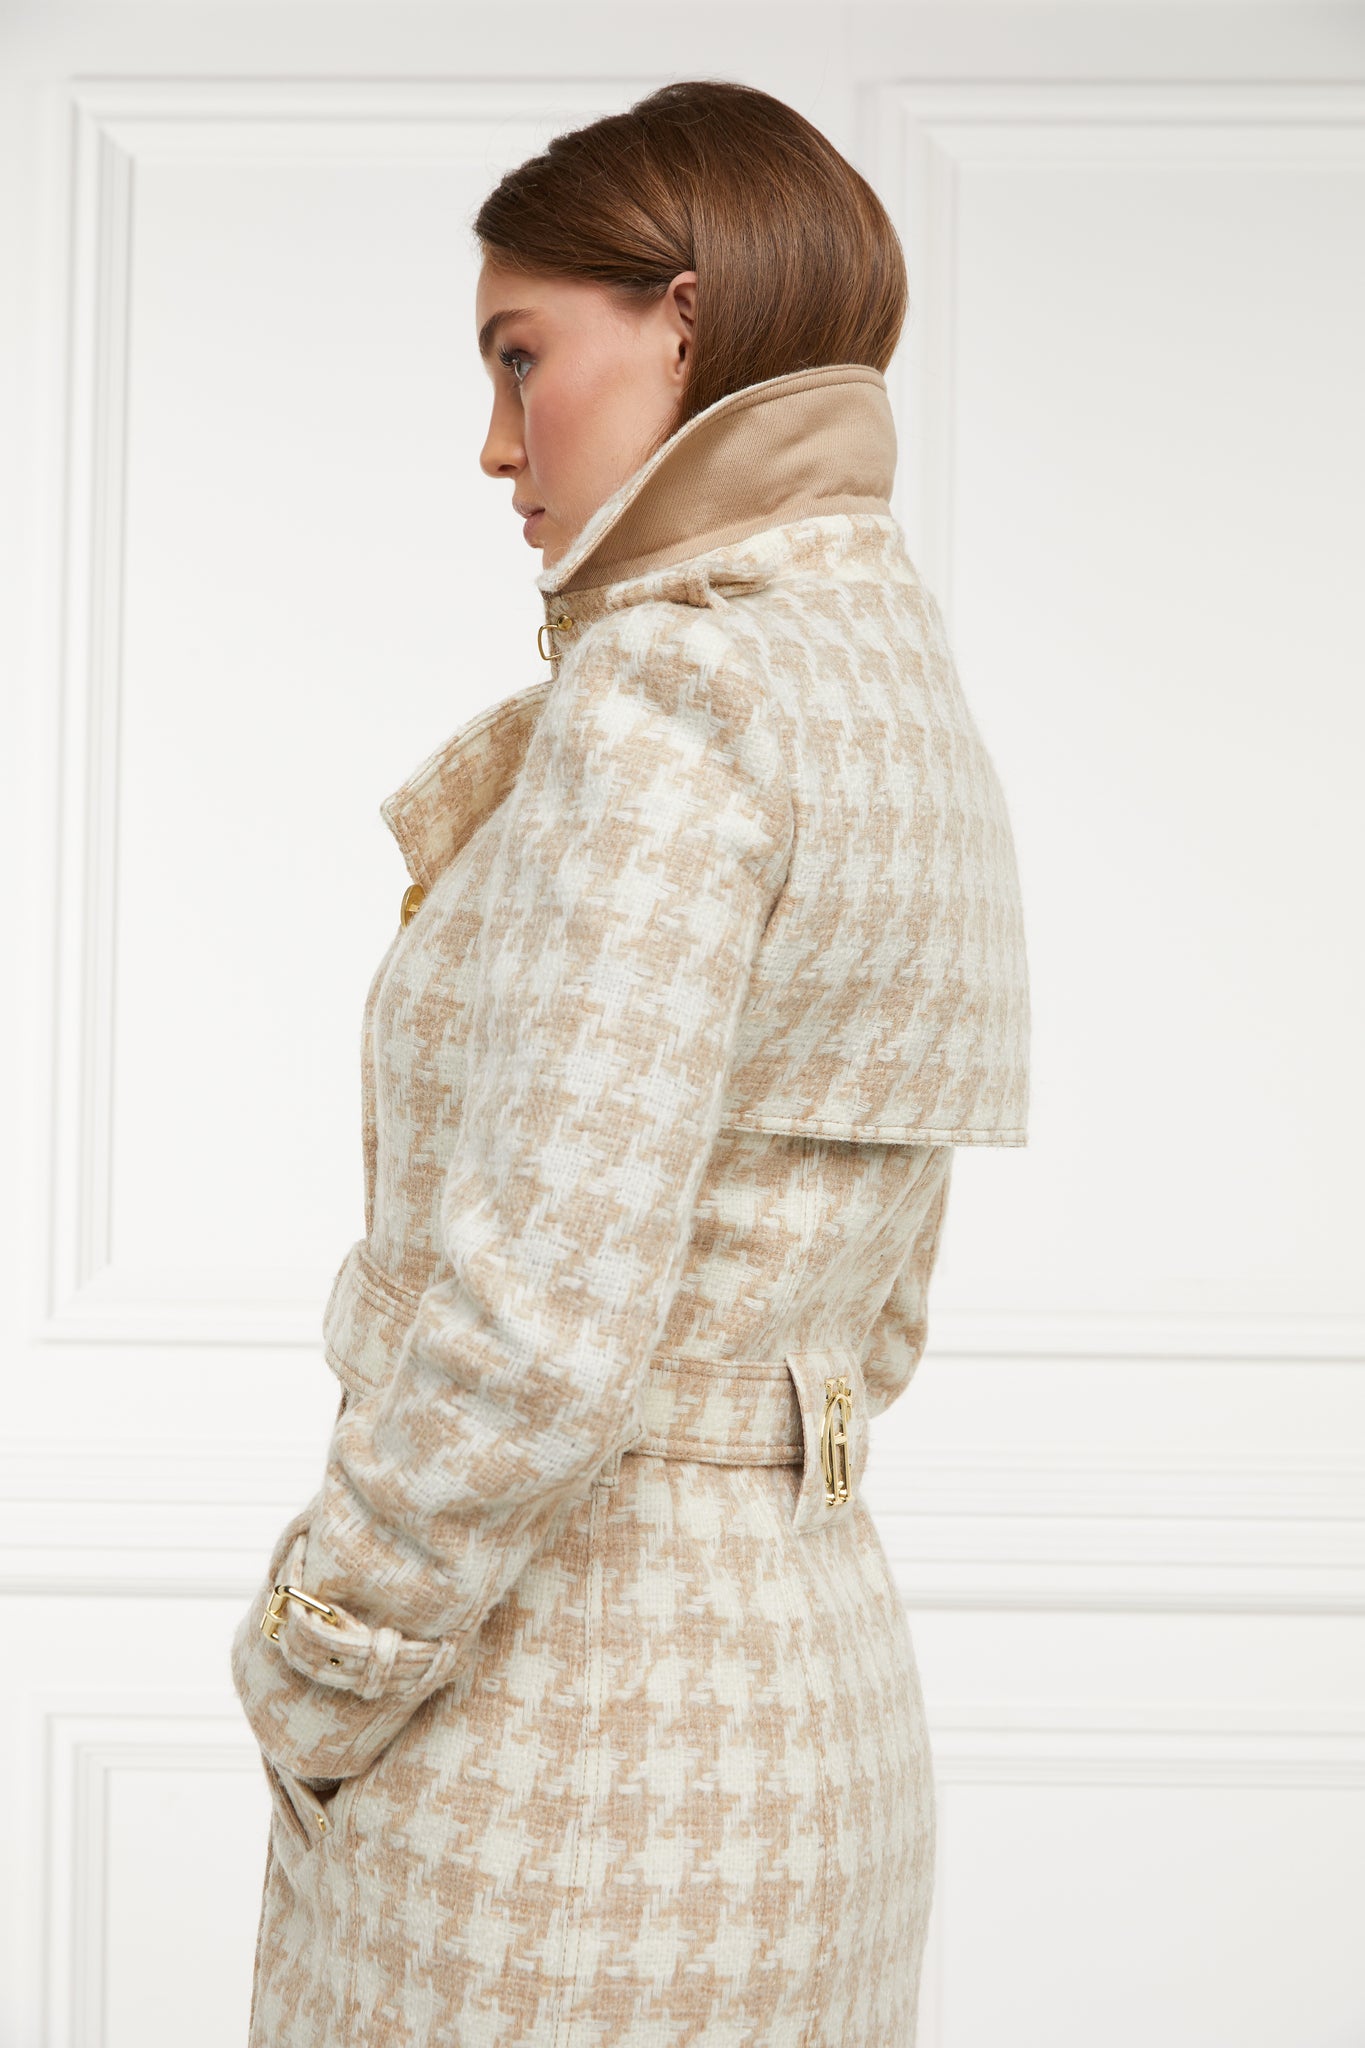 Camel under collar detail on womens cream and camel houndstooth double breasted full length wool trench coat